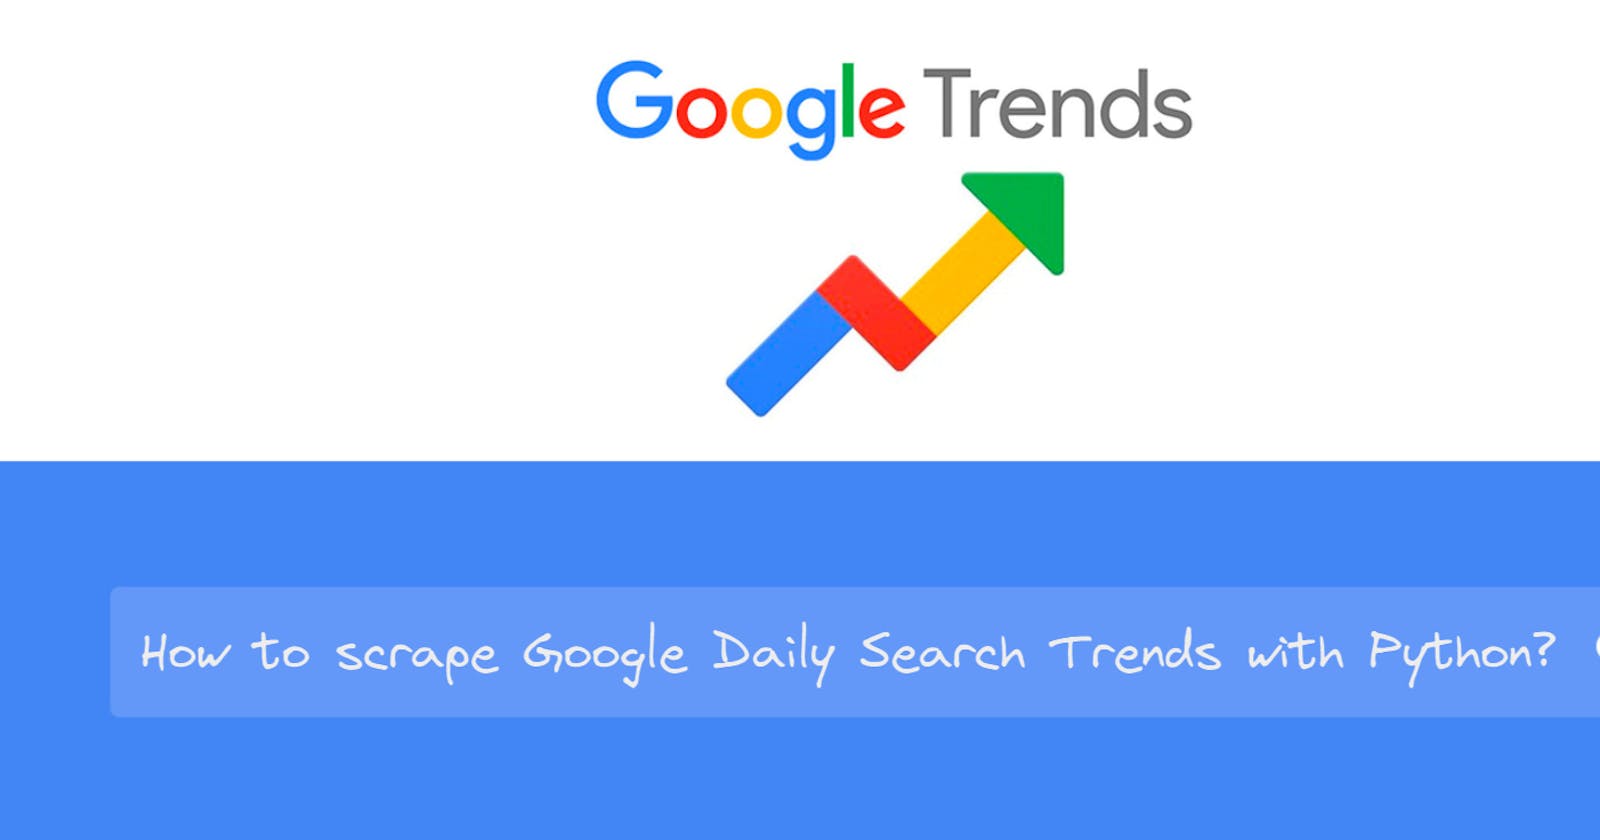 Scrape Google Daily Search Trends with Python